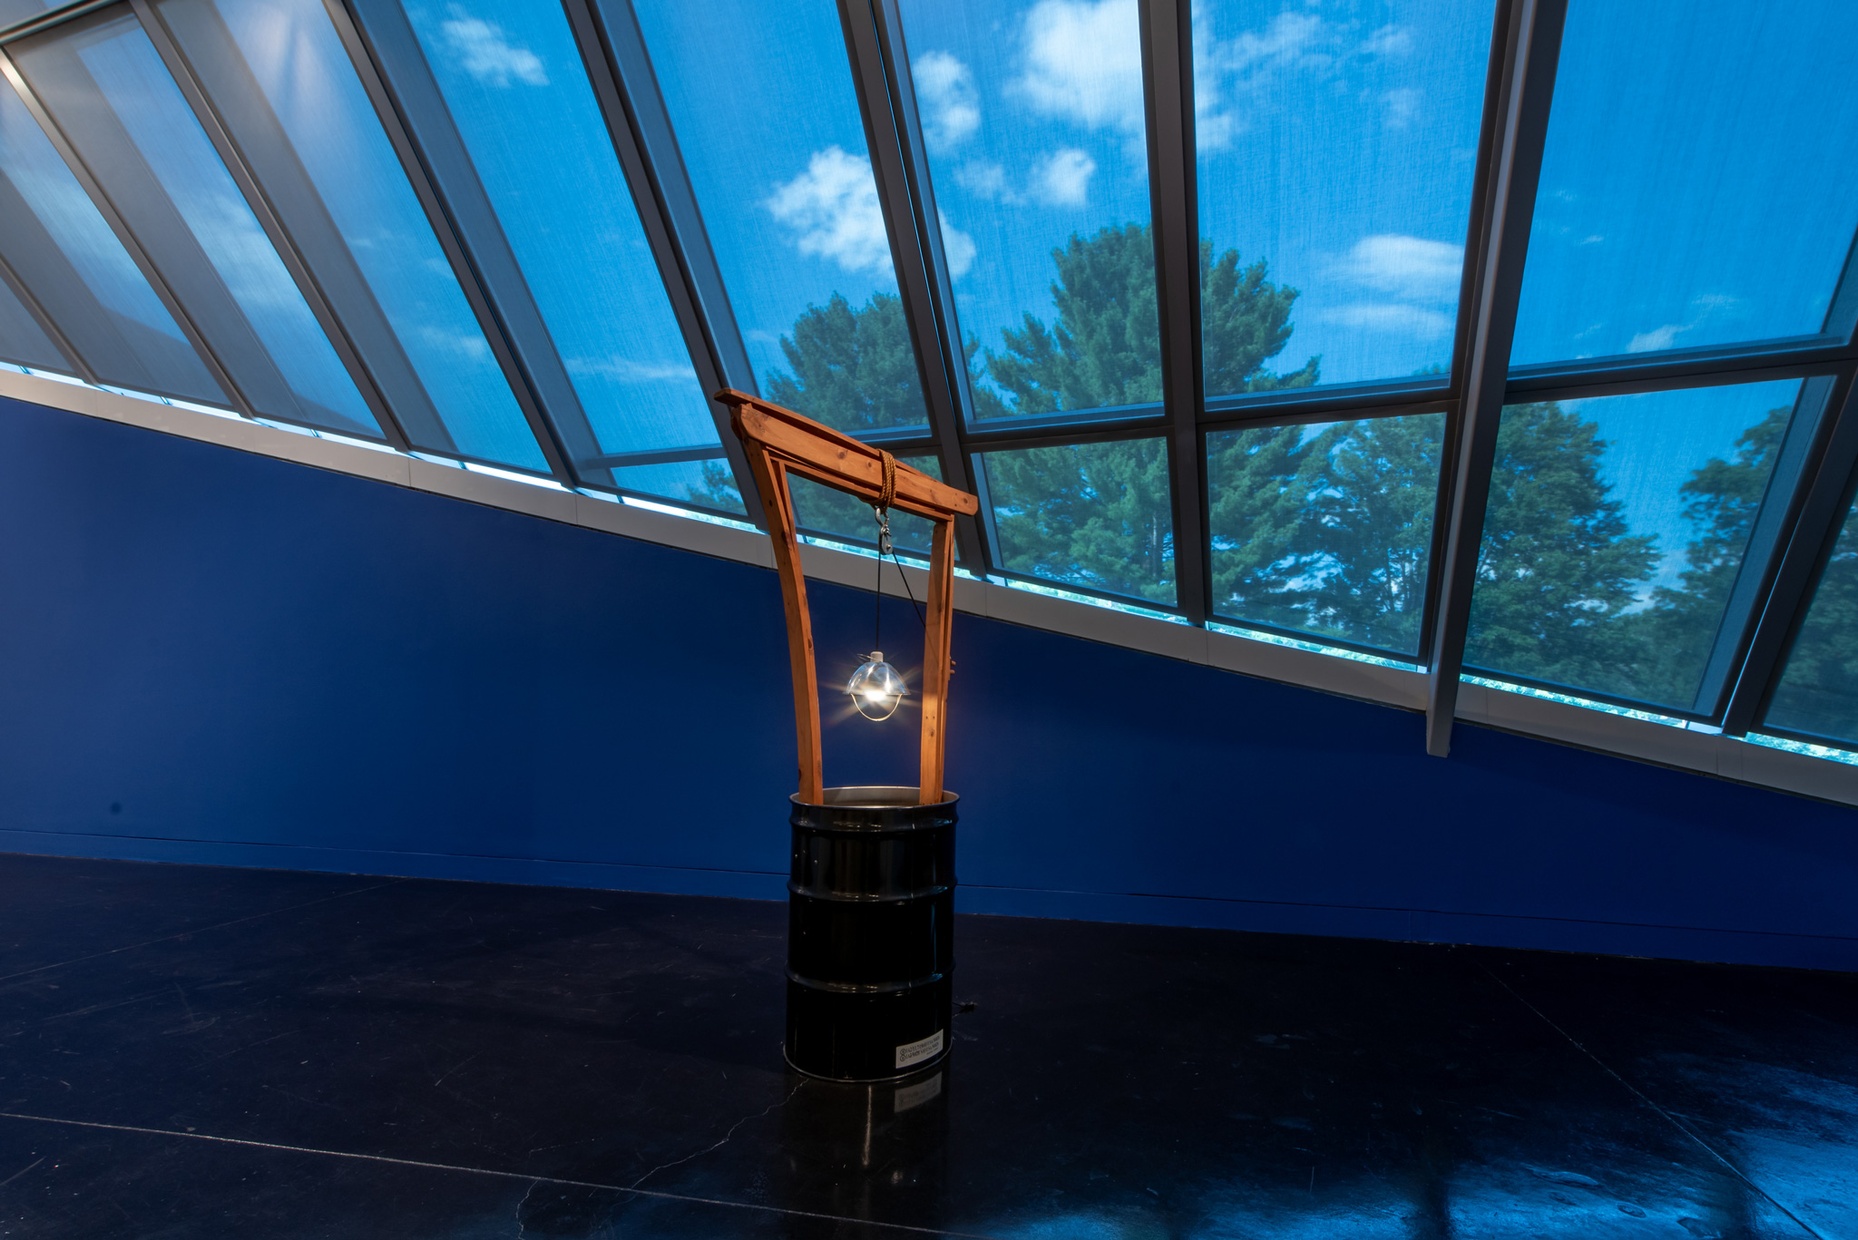 Against a dark blue wall below a large window sits a well-like structure made of a black steel drum out of which protrudes a light hanging from a wooden arch.